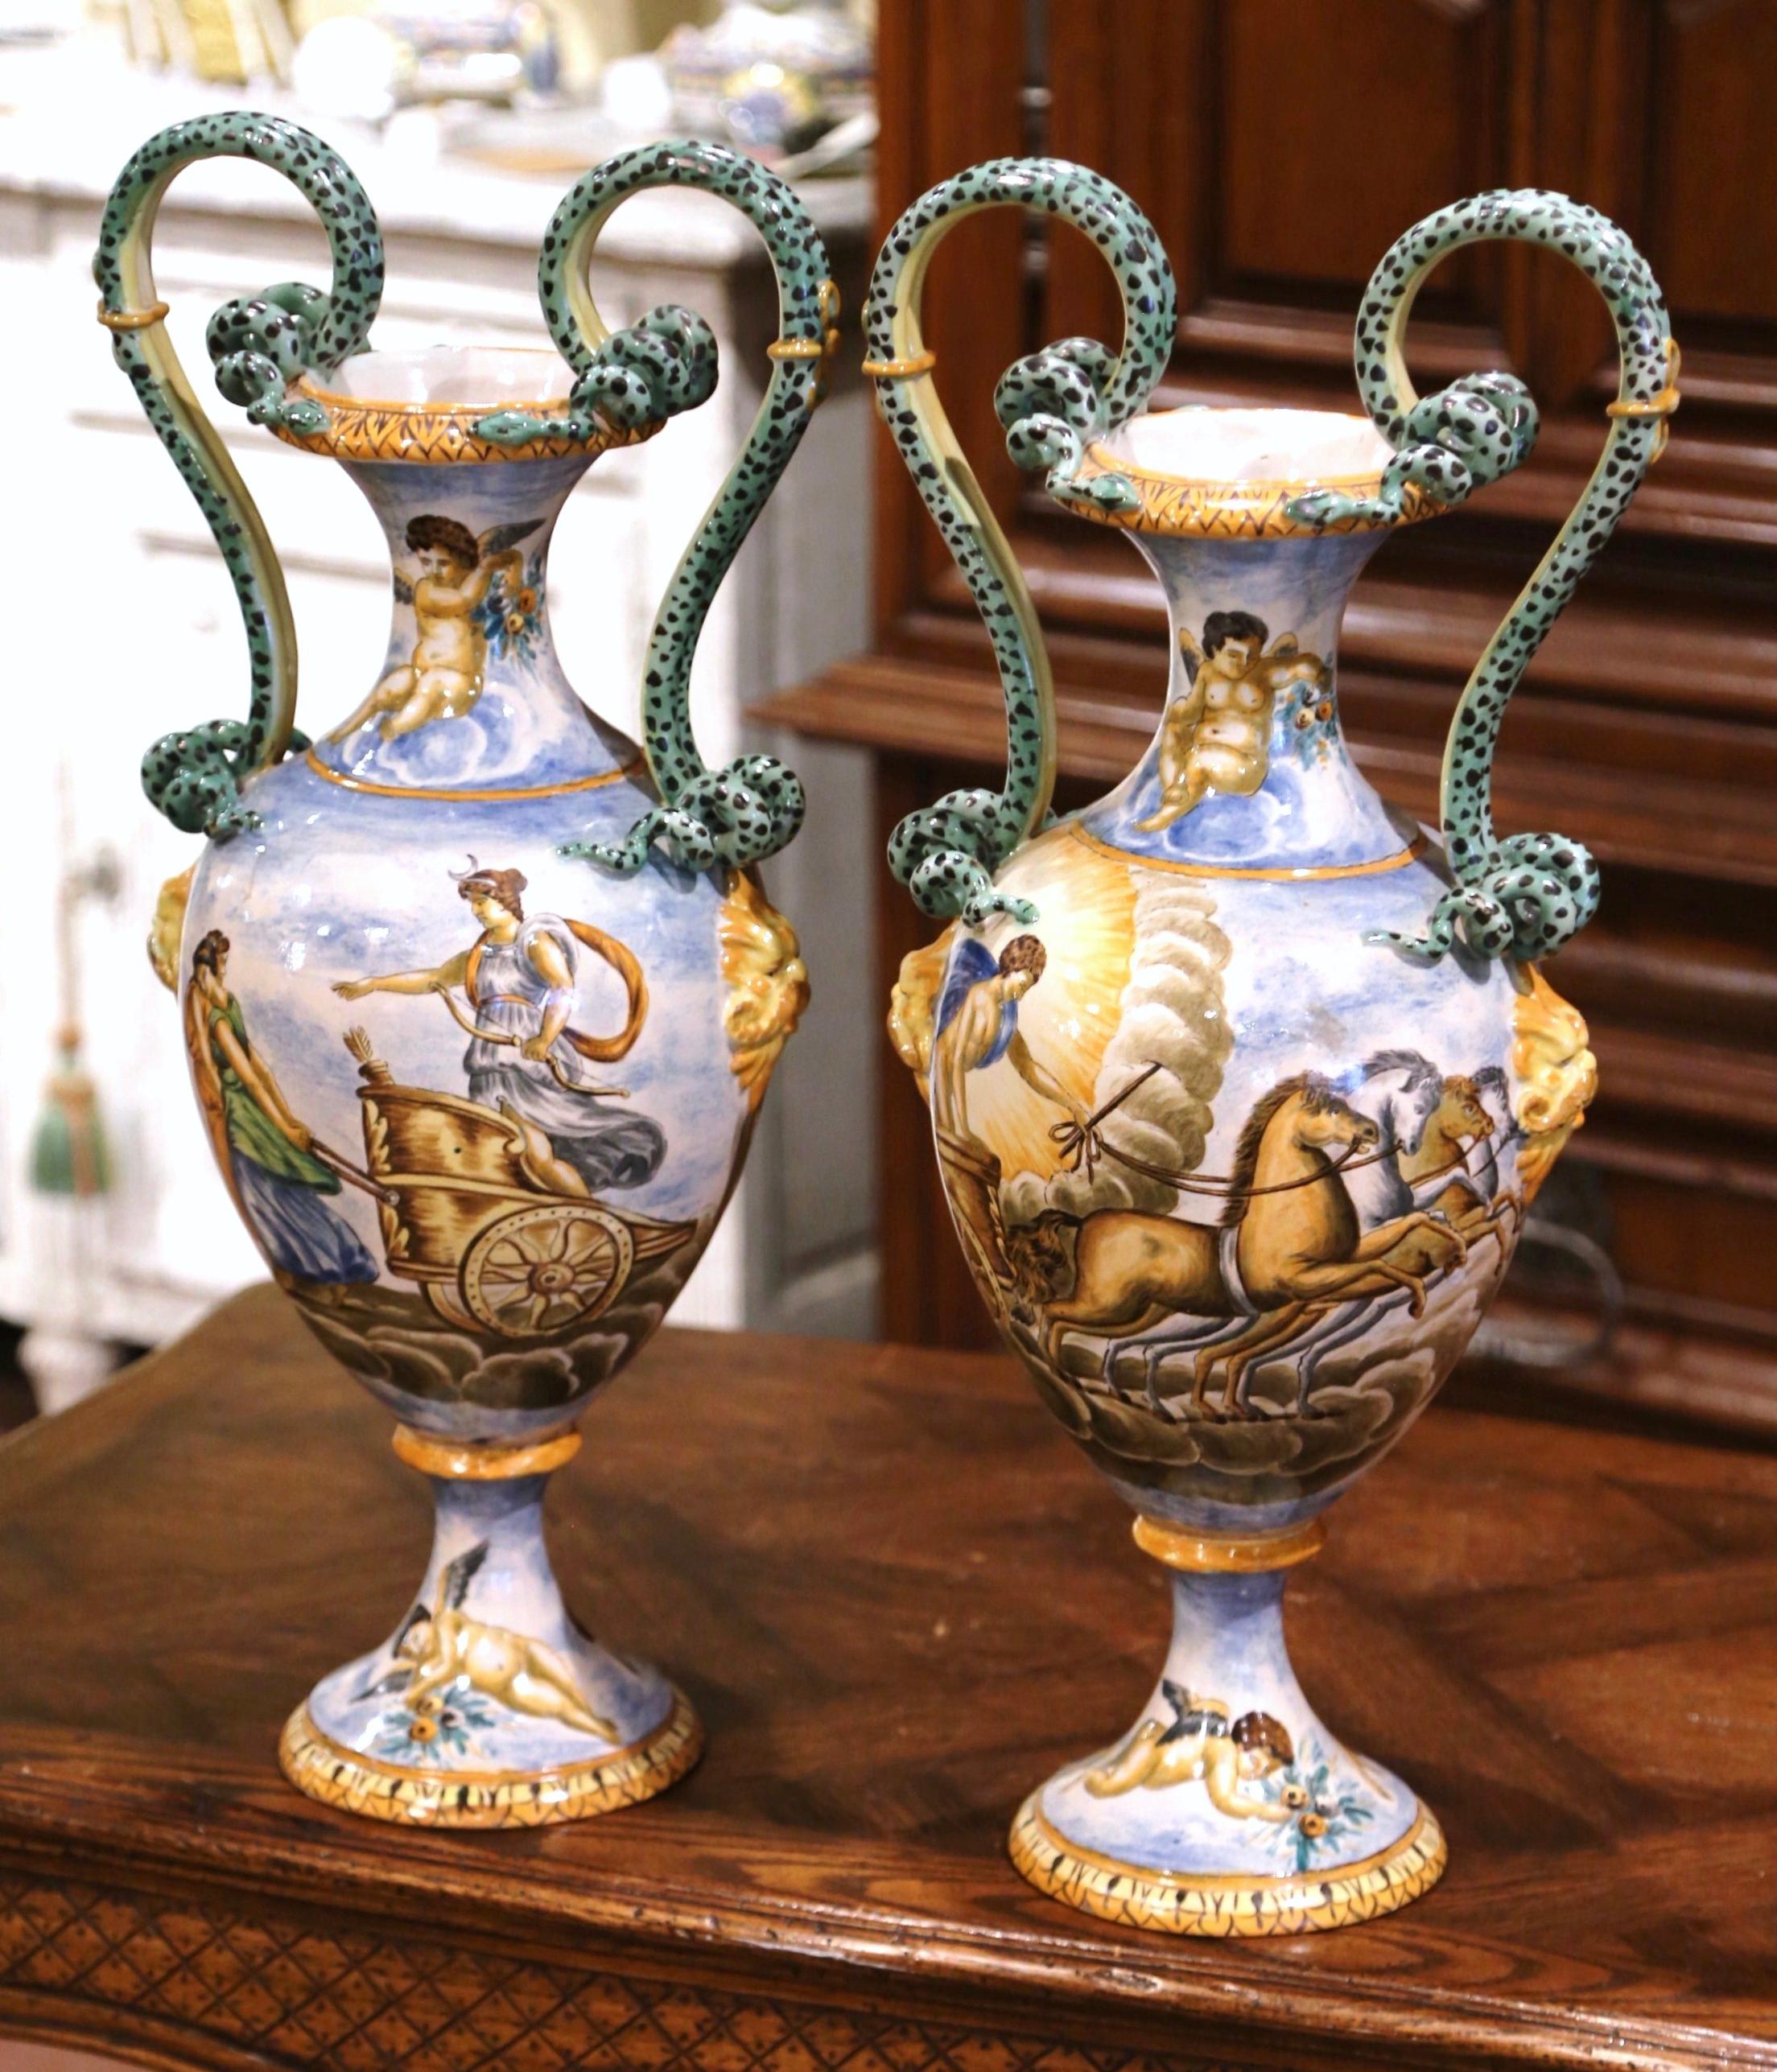 This delicate pair of antique porcelain vases were sculpted in Italy, circa 1870. Each classical vase stands on round base decorated with hand painted cherubs; each vessel is supported with scrolled snake form handles over a long neck, also